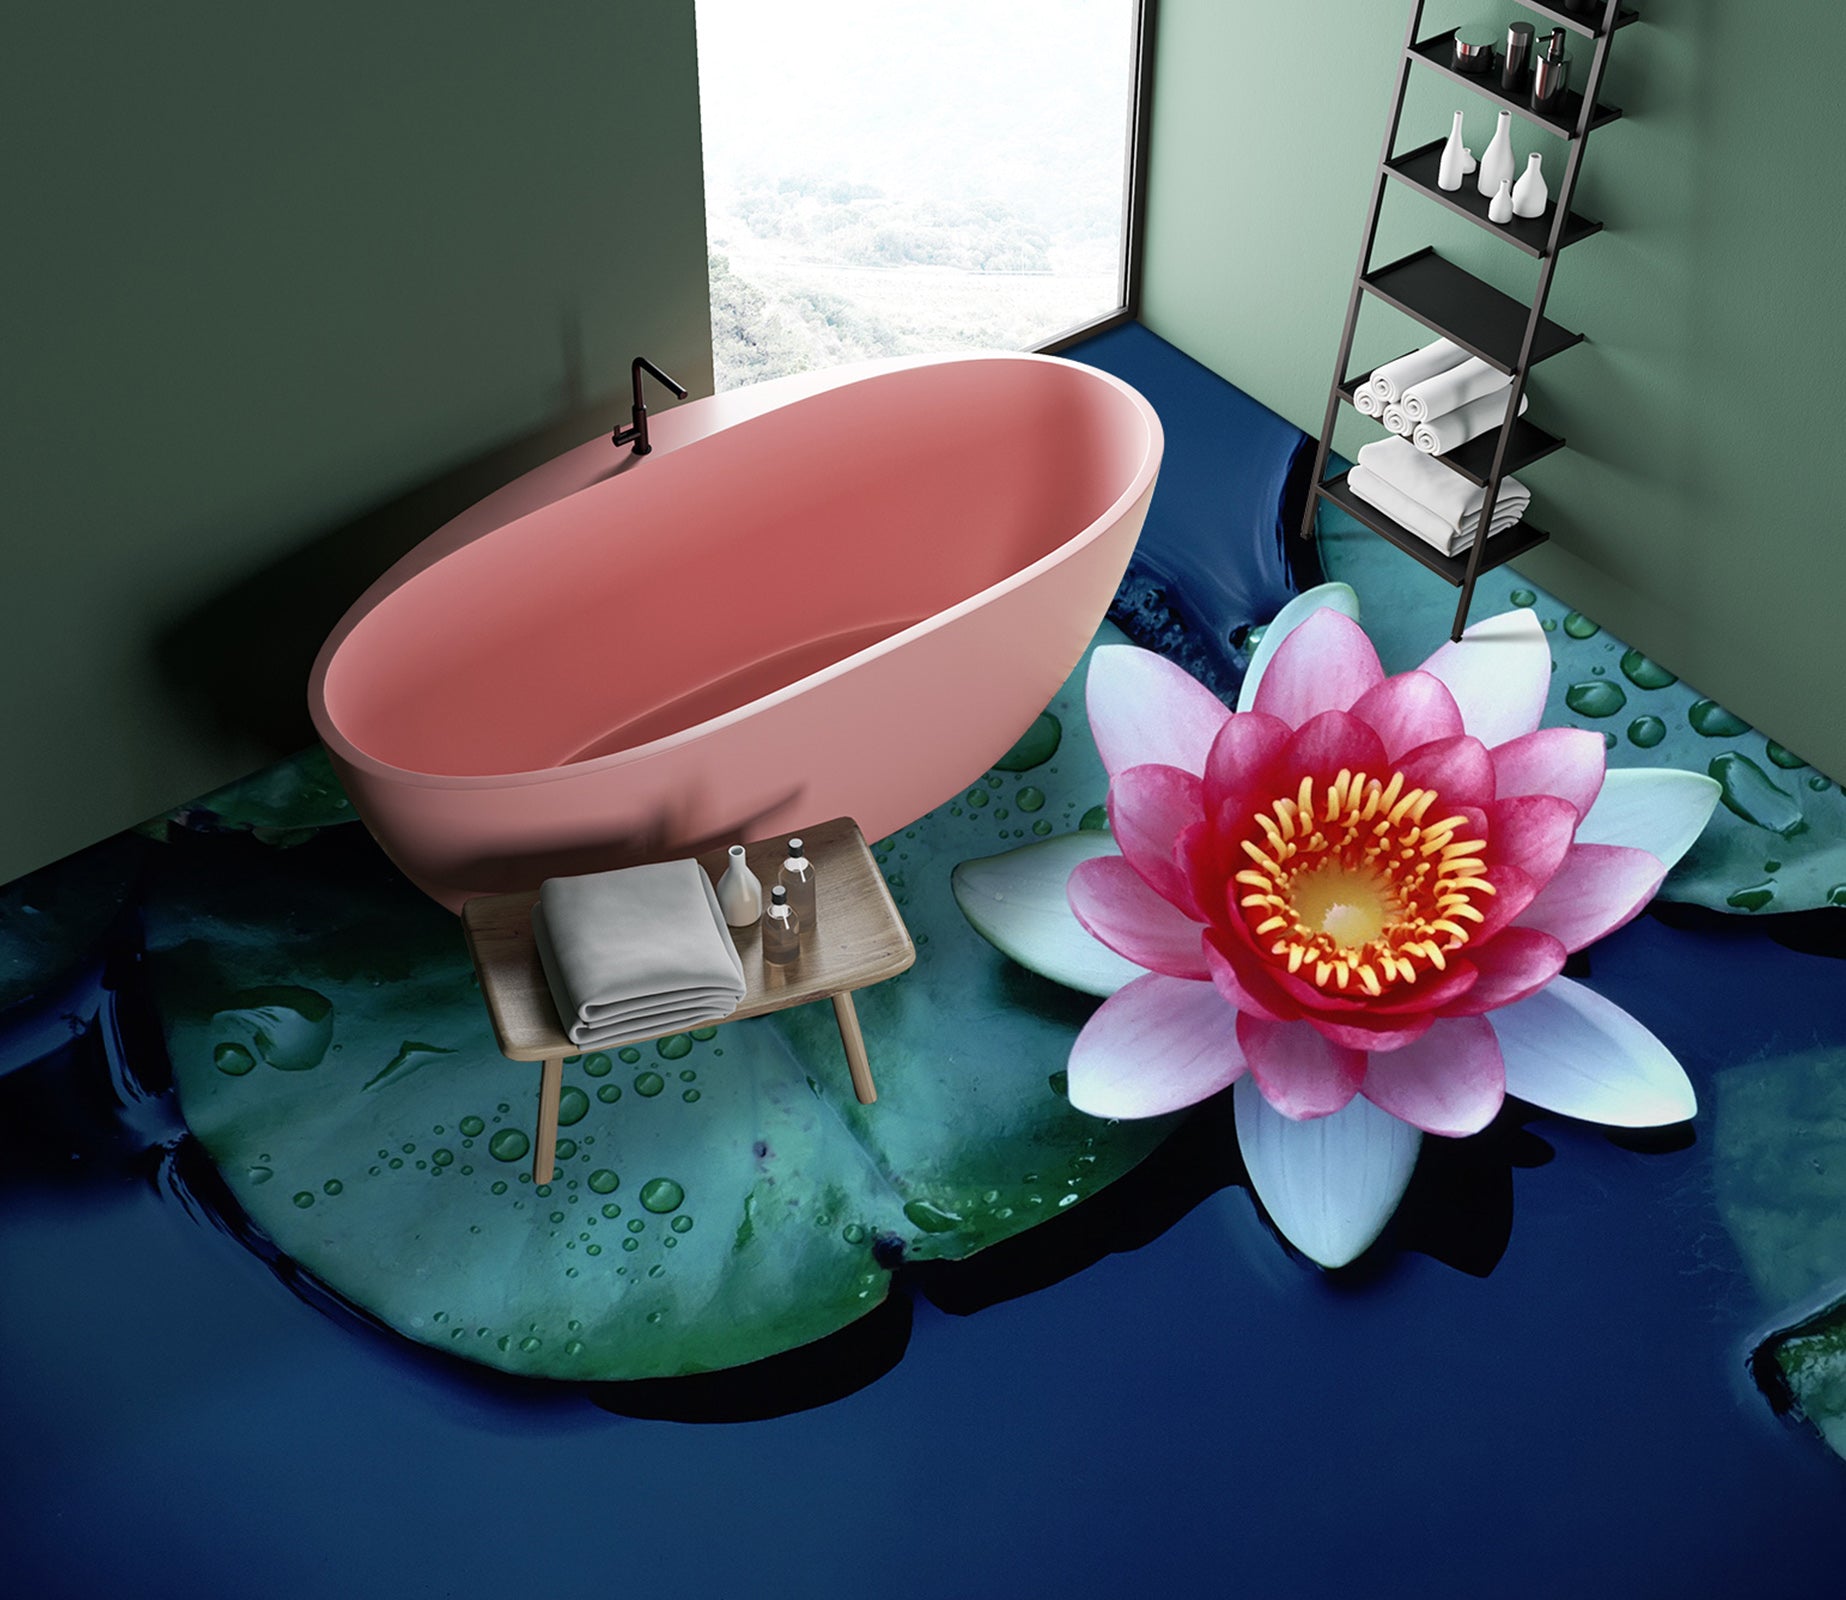 3D Delicate Water Lily 1482 Floor Mural  Wallpaper Murals Self-Adhesive Removable Print Epoxy